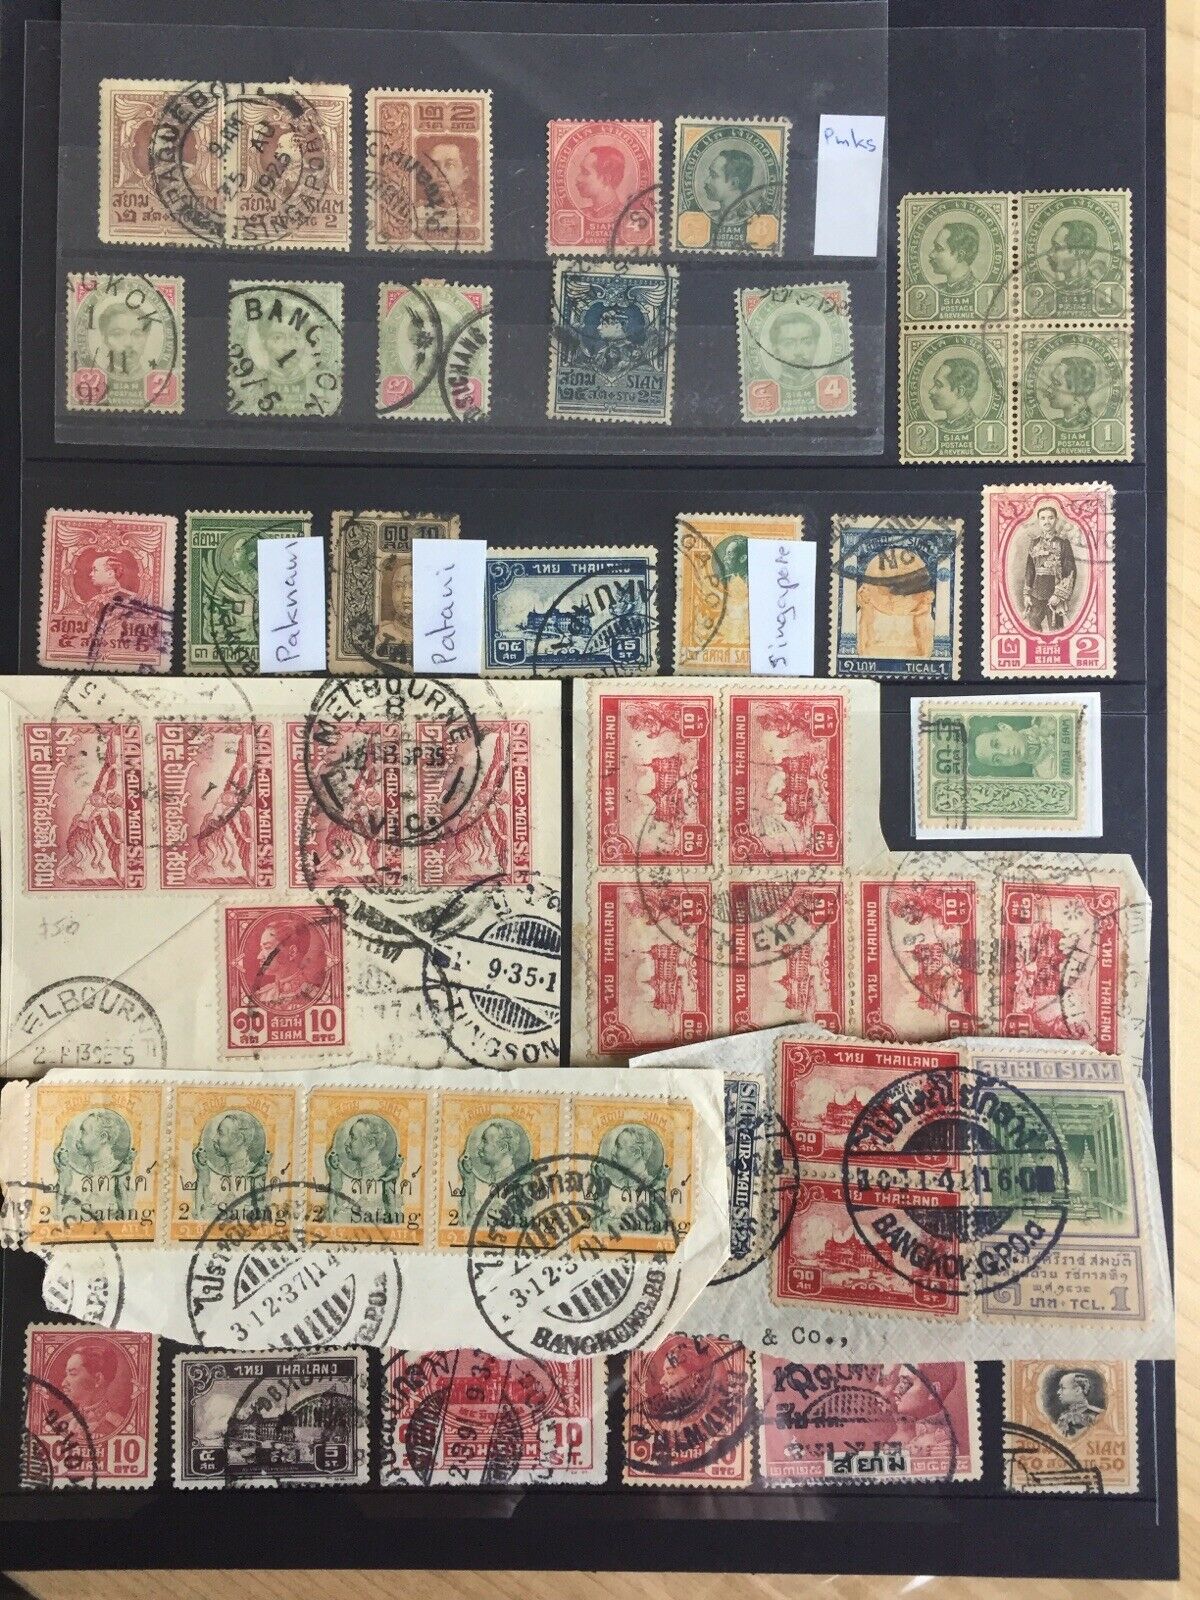 Thailand Pre War Postmark Collection Includes Paquebot & a few 1800s Issues.